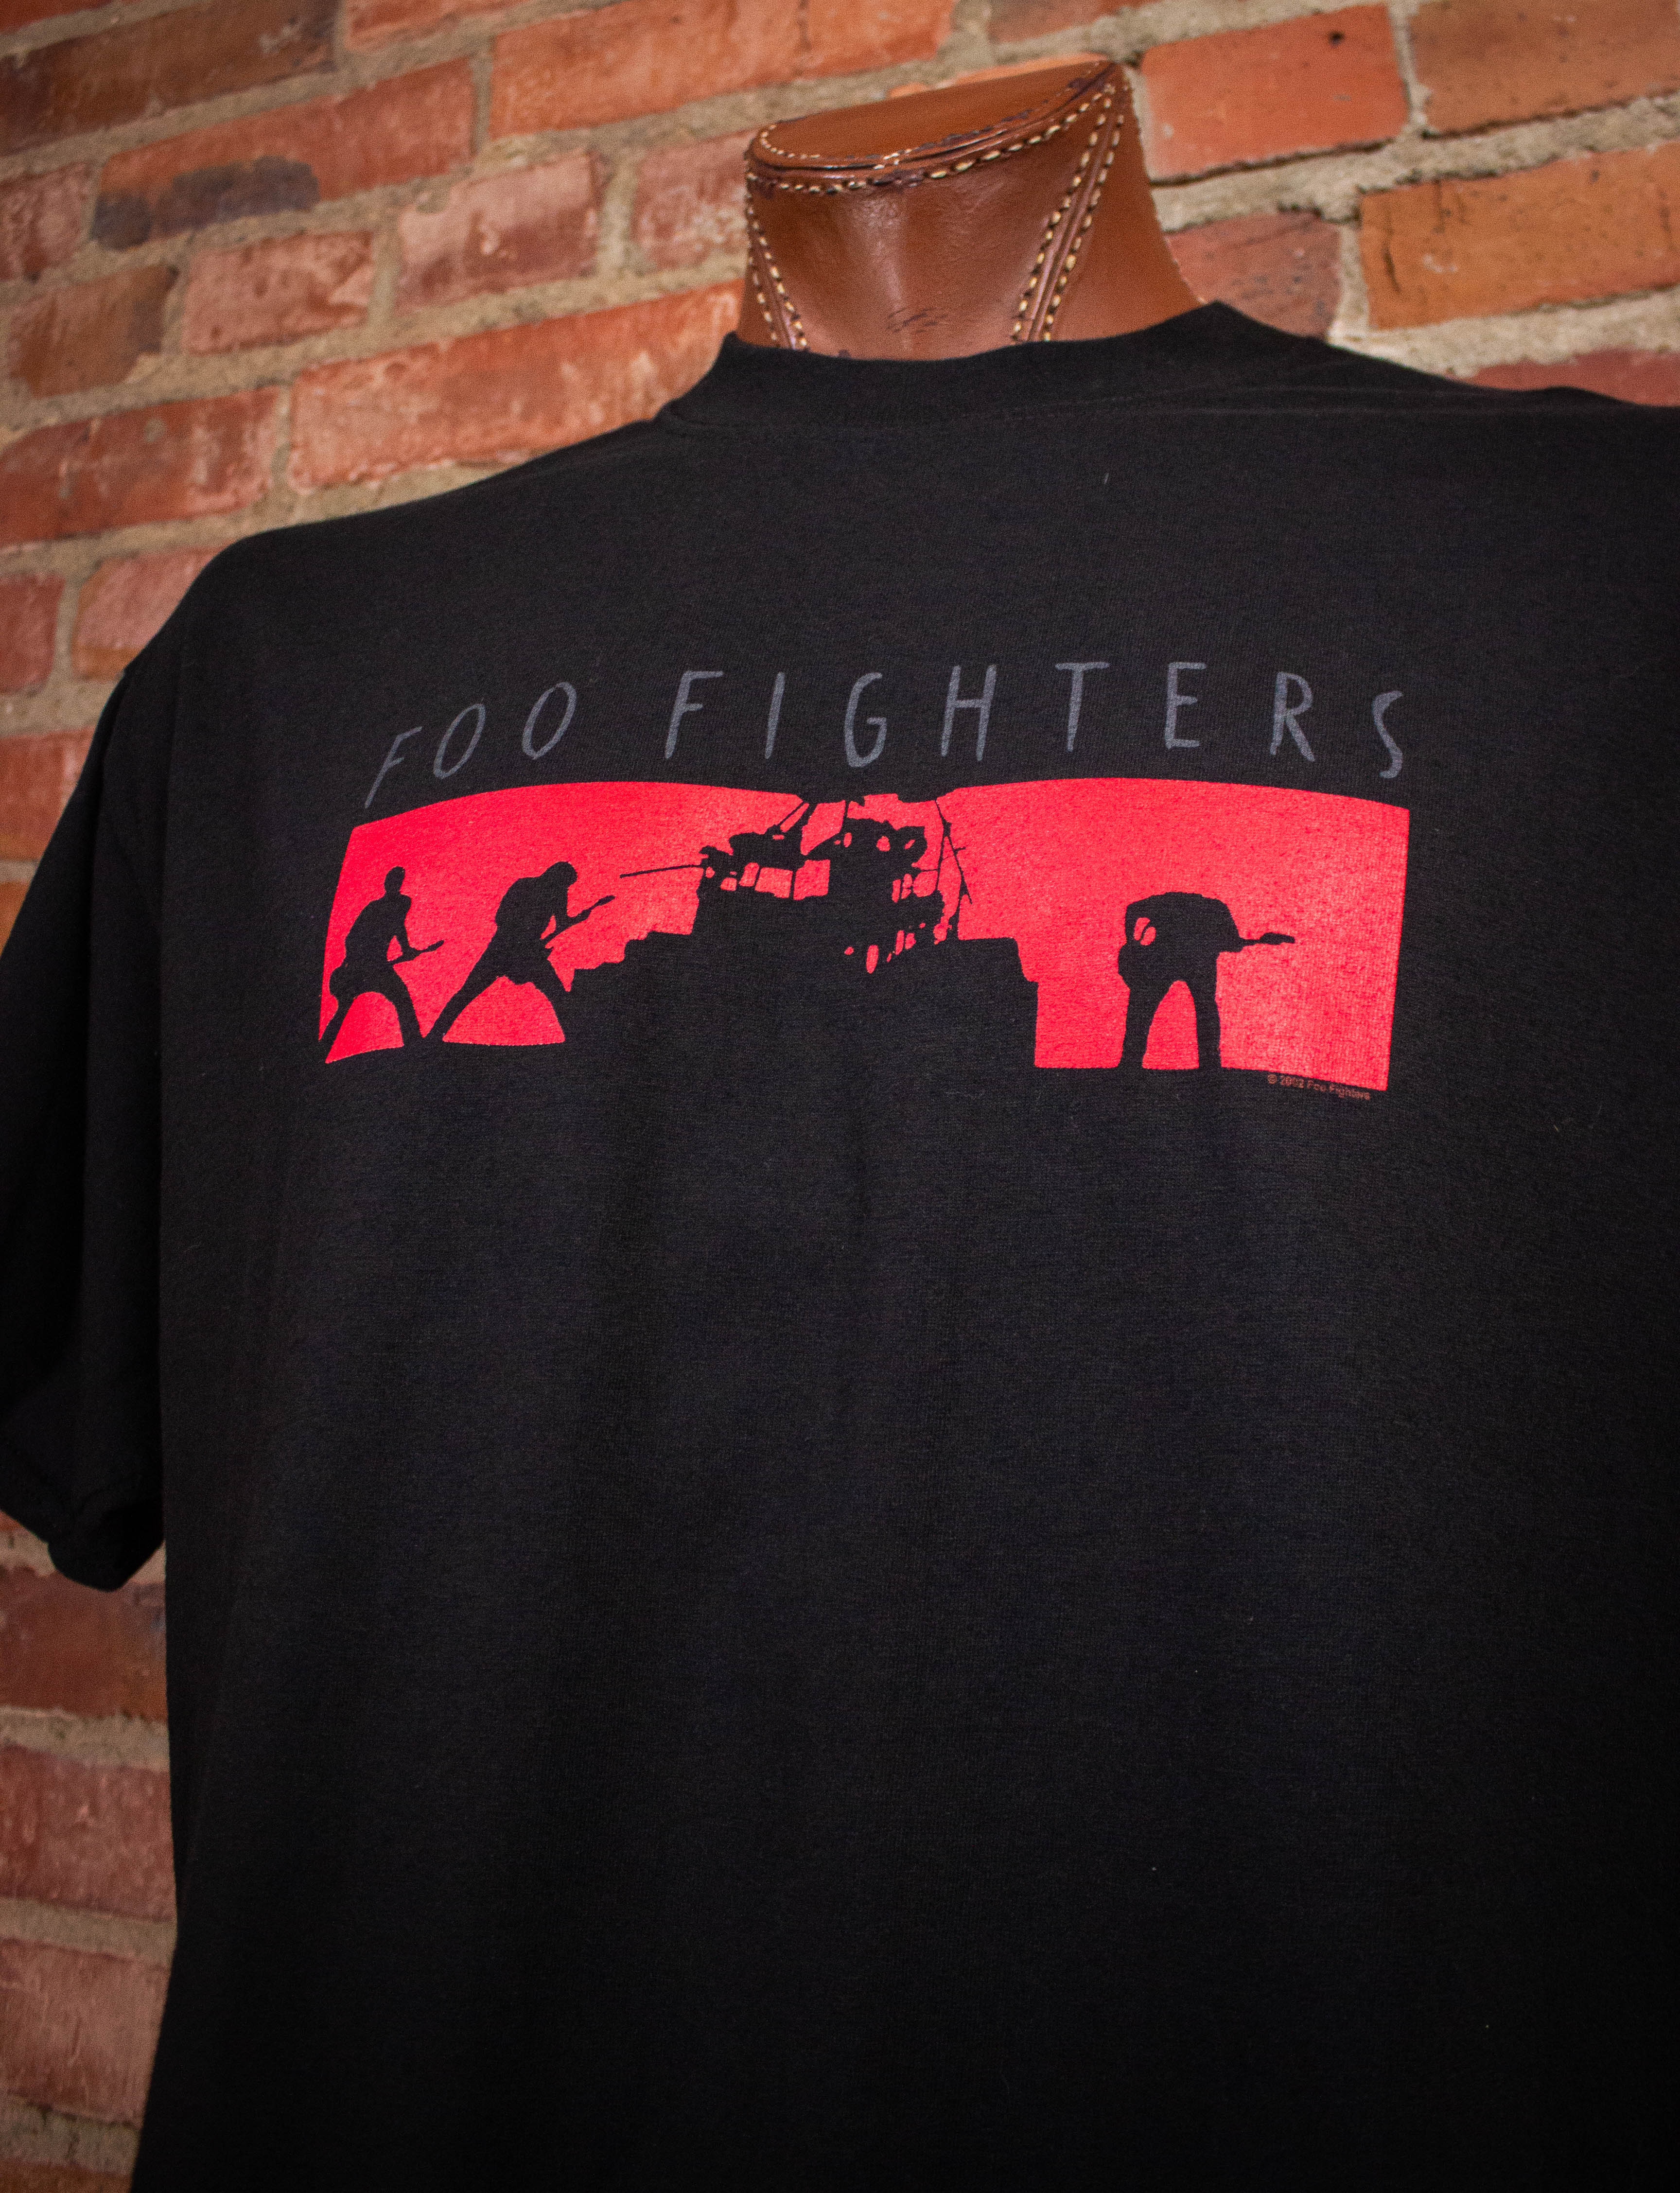 Vintage Foo Fighters One By One Concert T Shirt 2002 Black XL